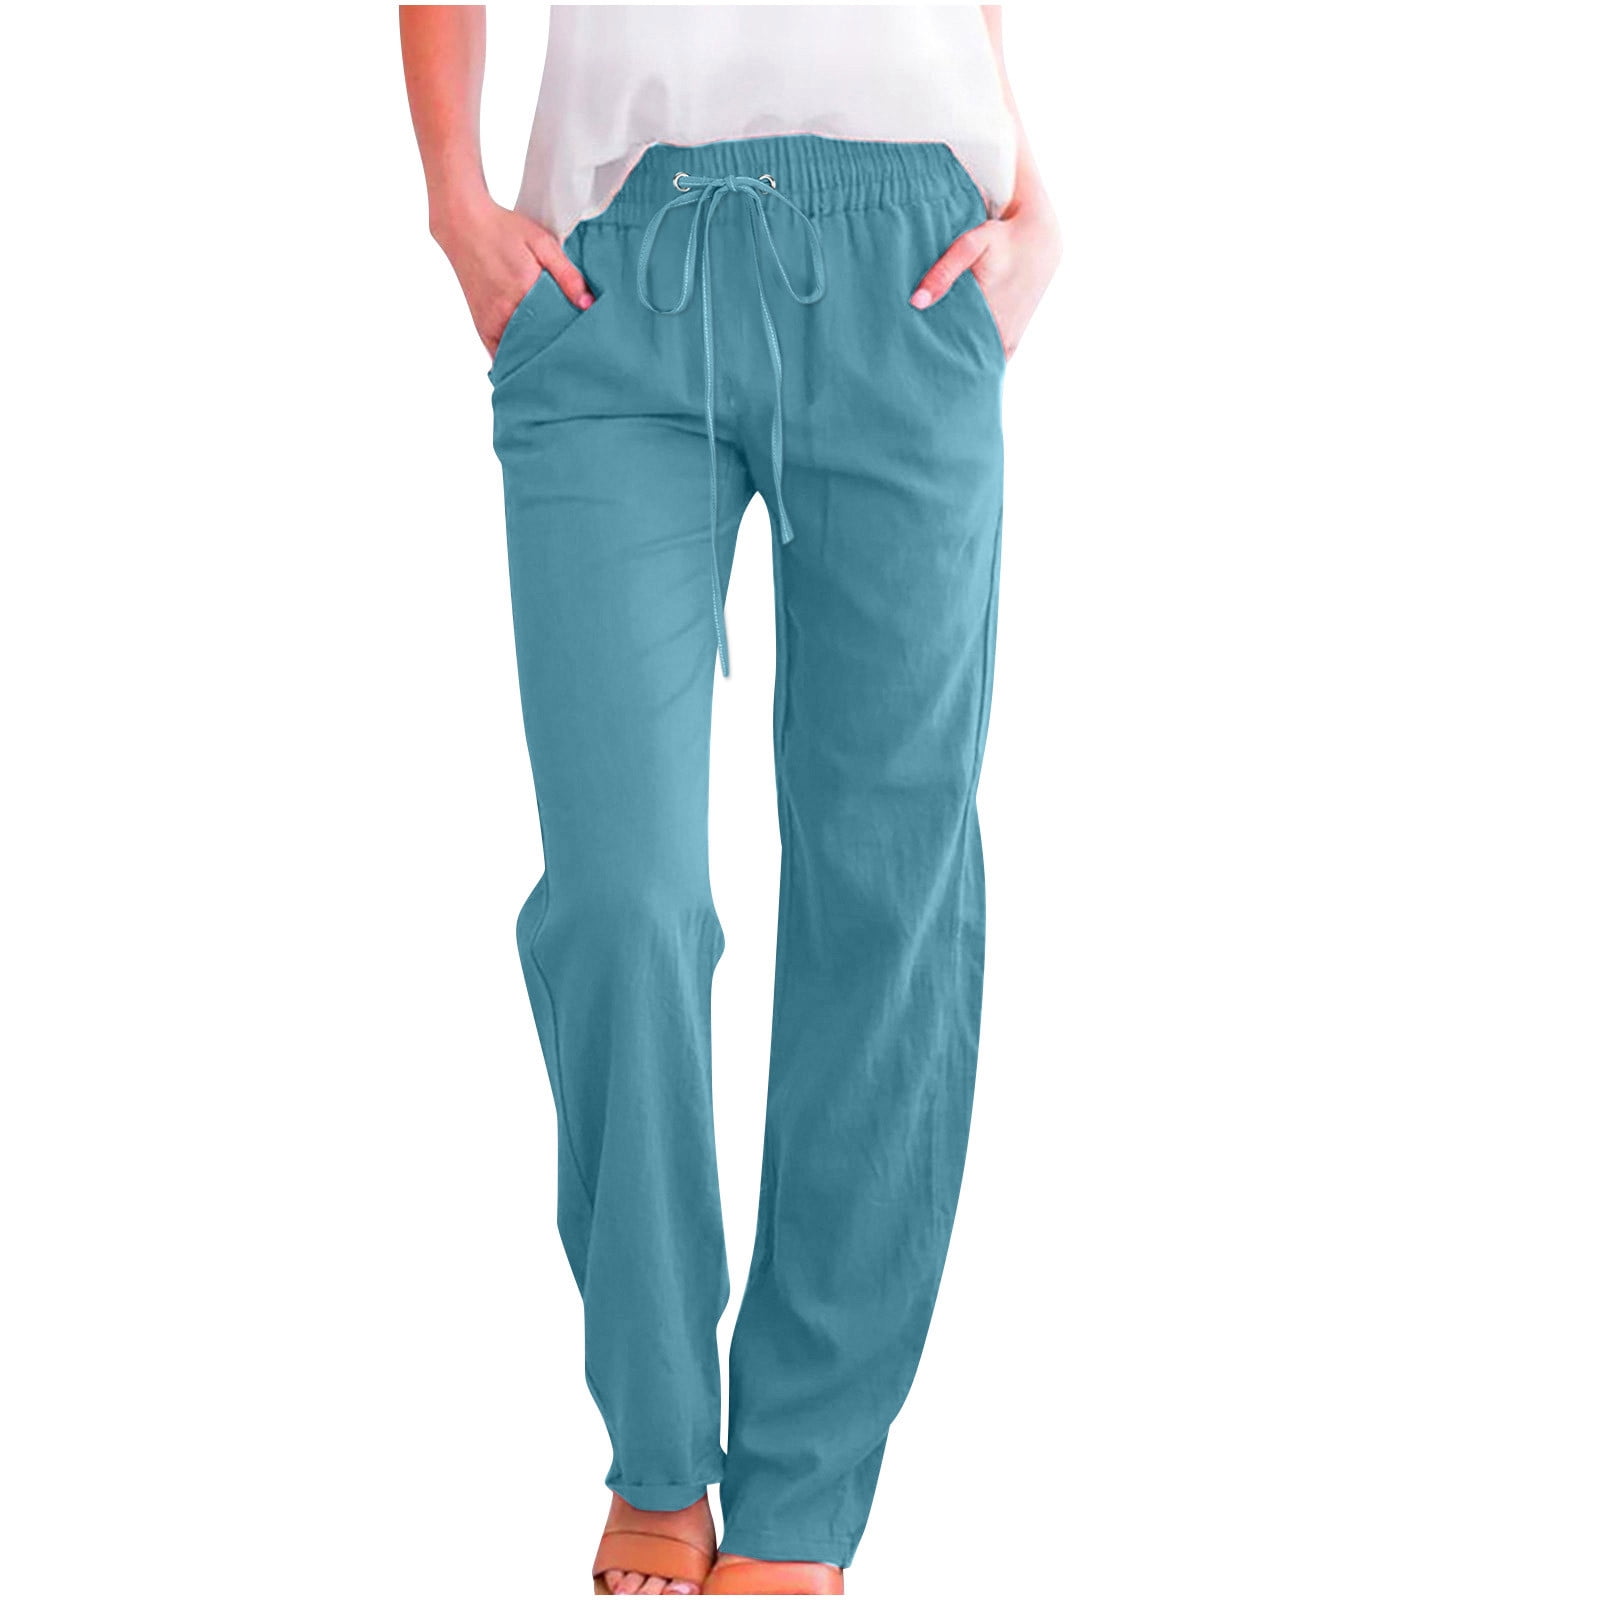 Women's Pant Women's Straight Fit Elastic Waisted Drawsting Cotton